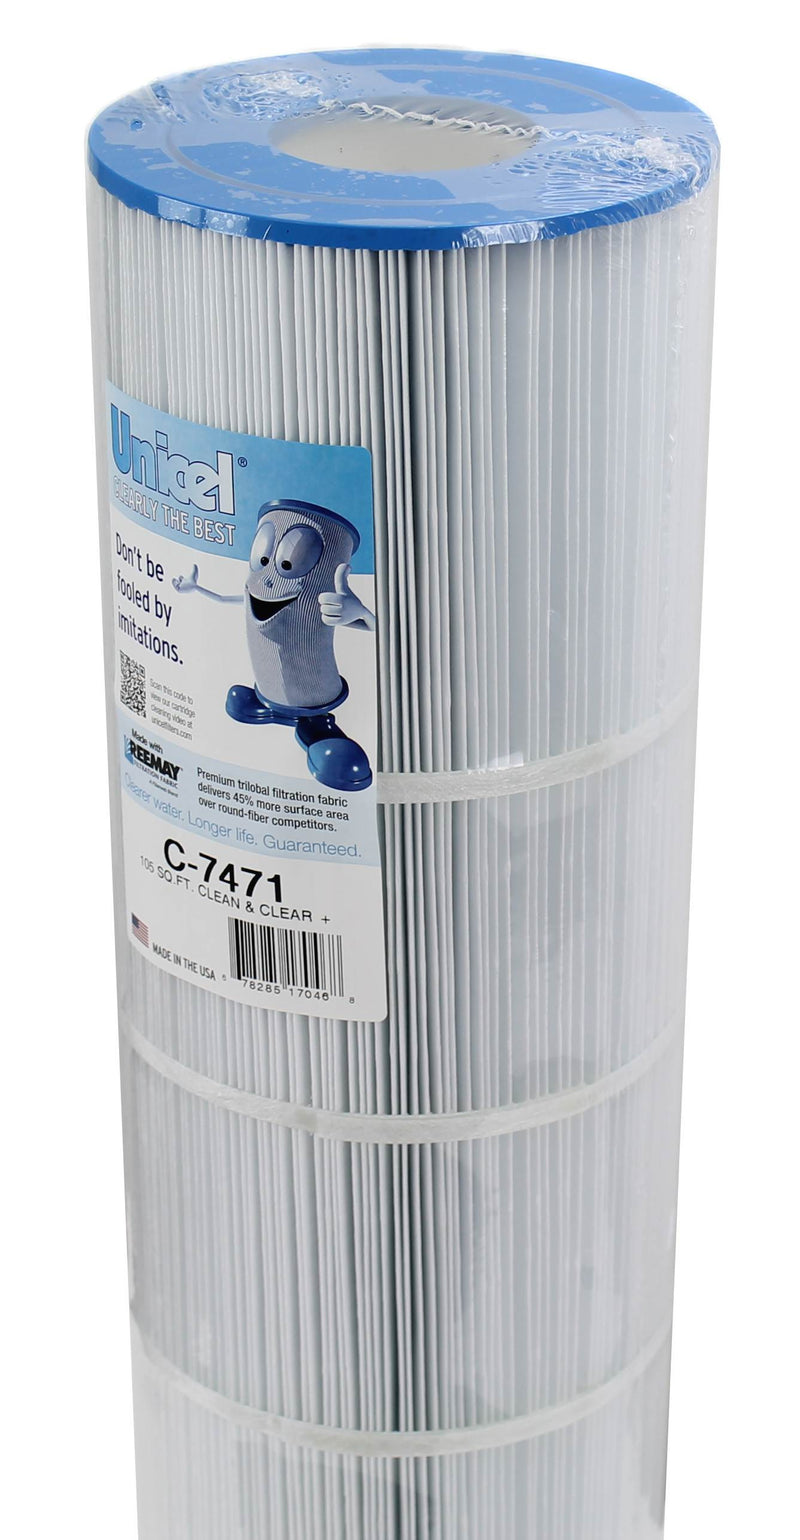 Unicel C-7471 Replacement 105 Sq Ft Pool Filter Cartridge, 168 Pleats (4 Pack)